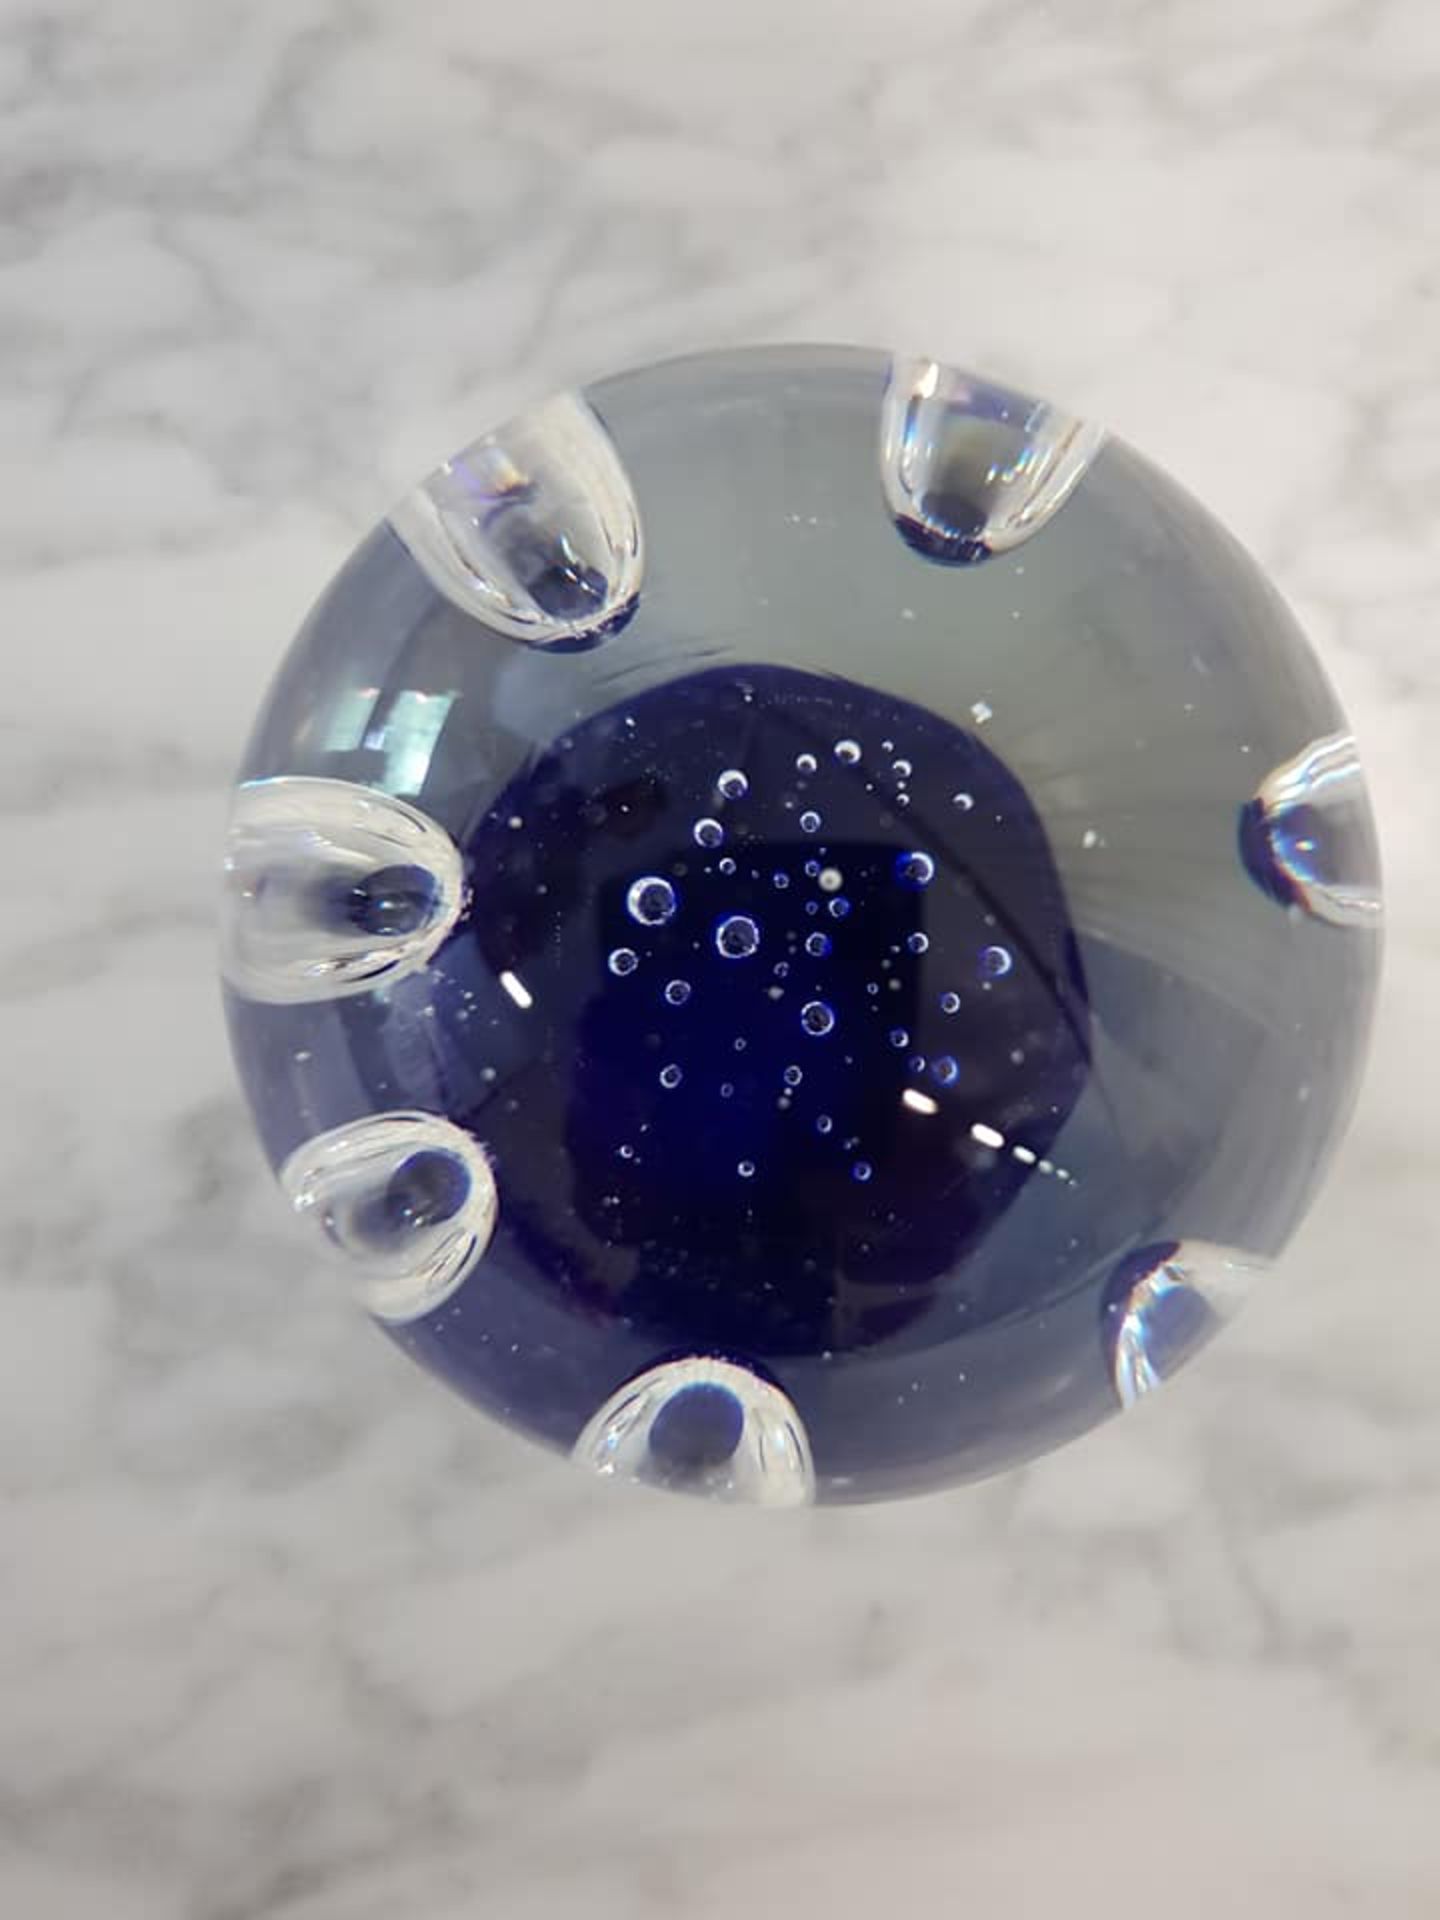 Bohemian blown art glass sphere paperweight 10cm dark navy blue middle with controlled bubbles - Image 2 of 2